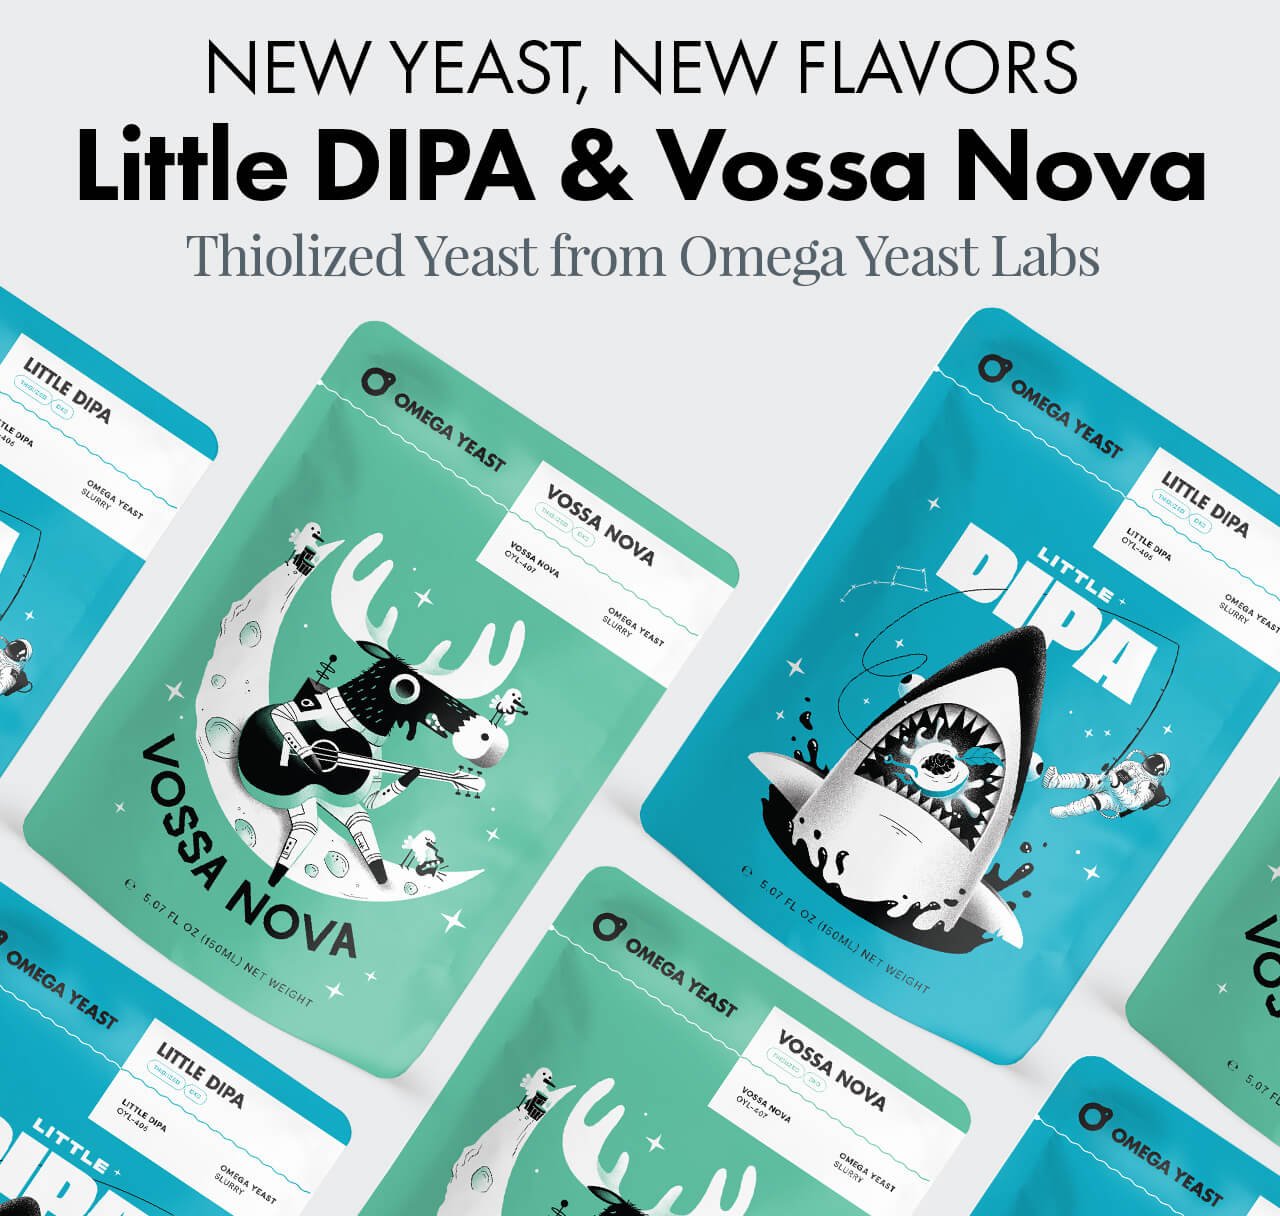 New Yeast, New Flavors Little DIPA & Vossa Nova Thiolized Yeast from Omega Yeast Labs